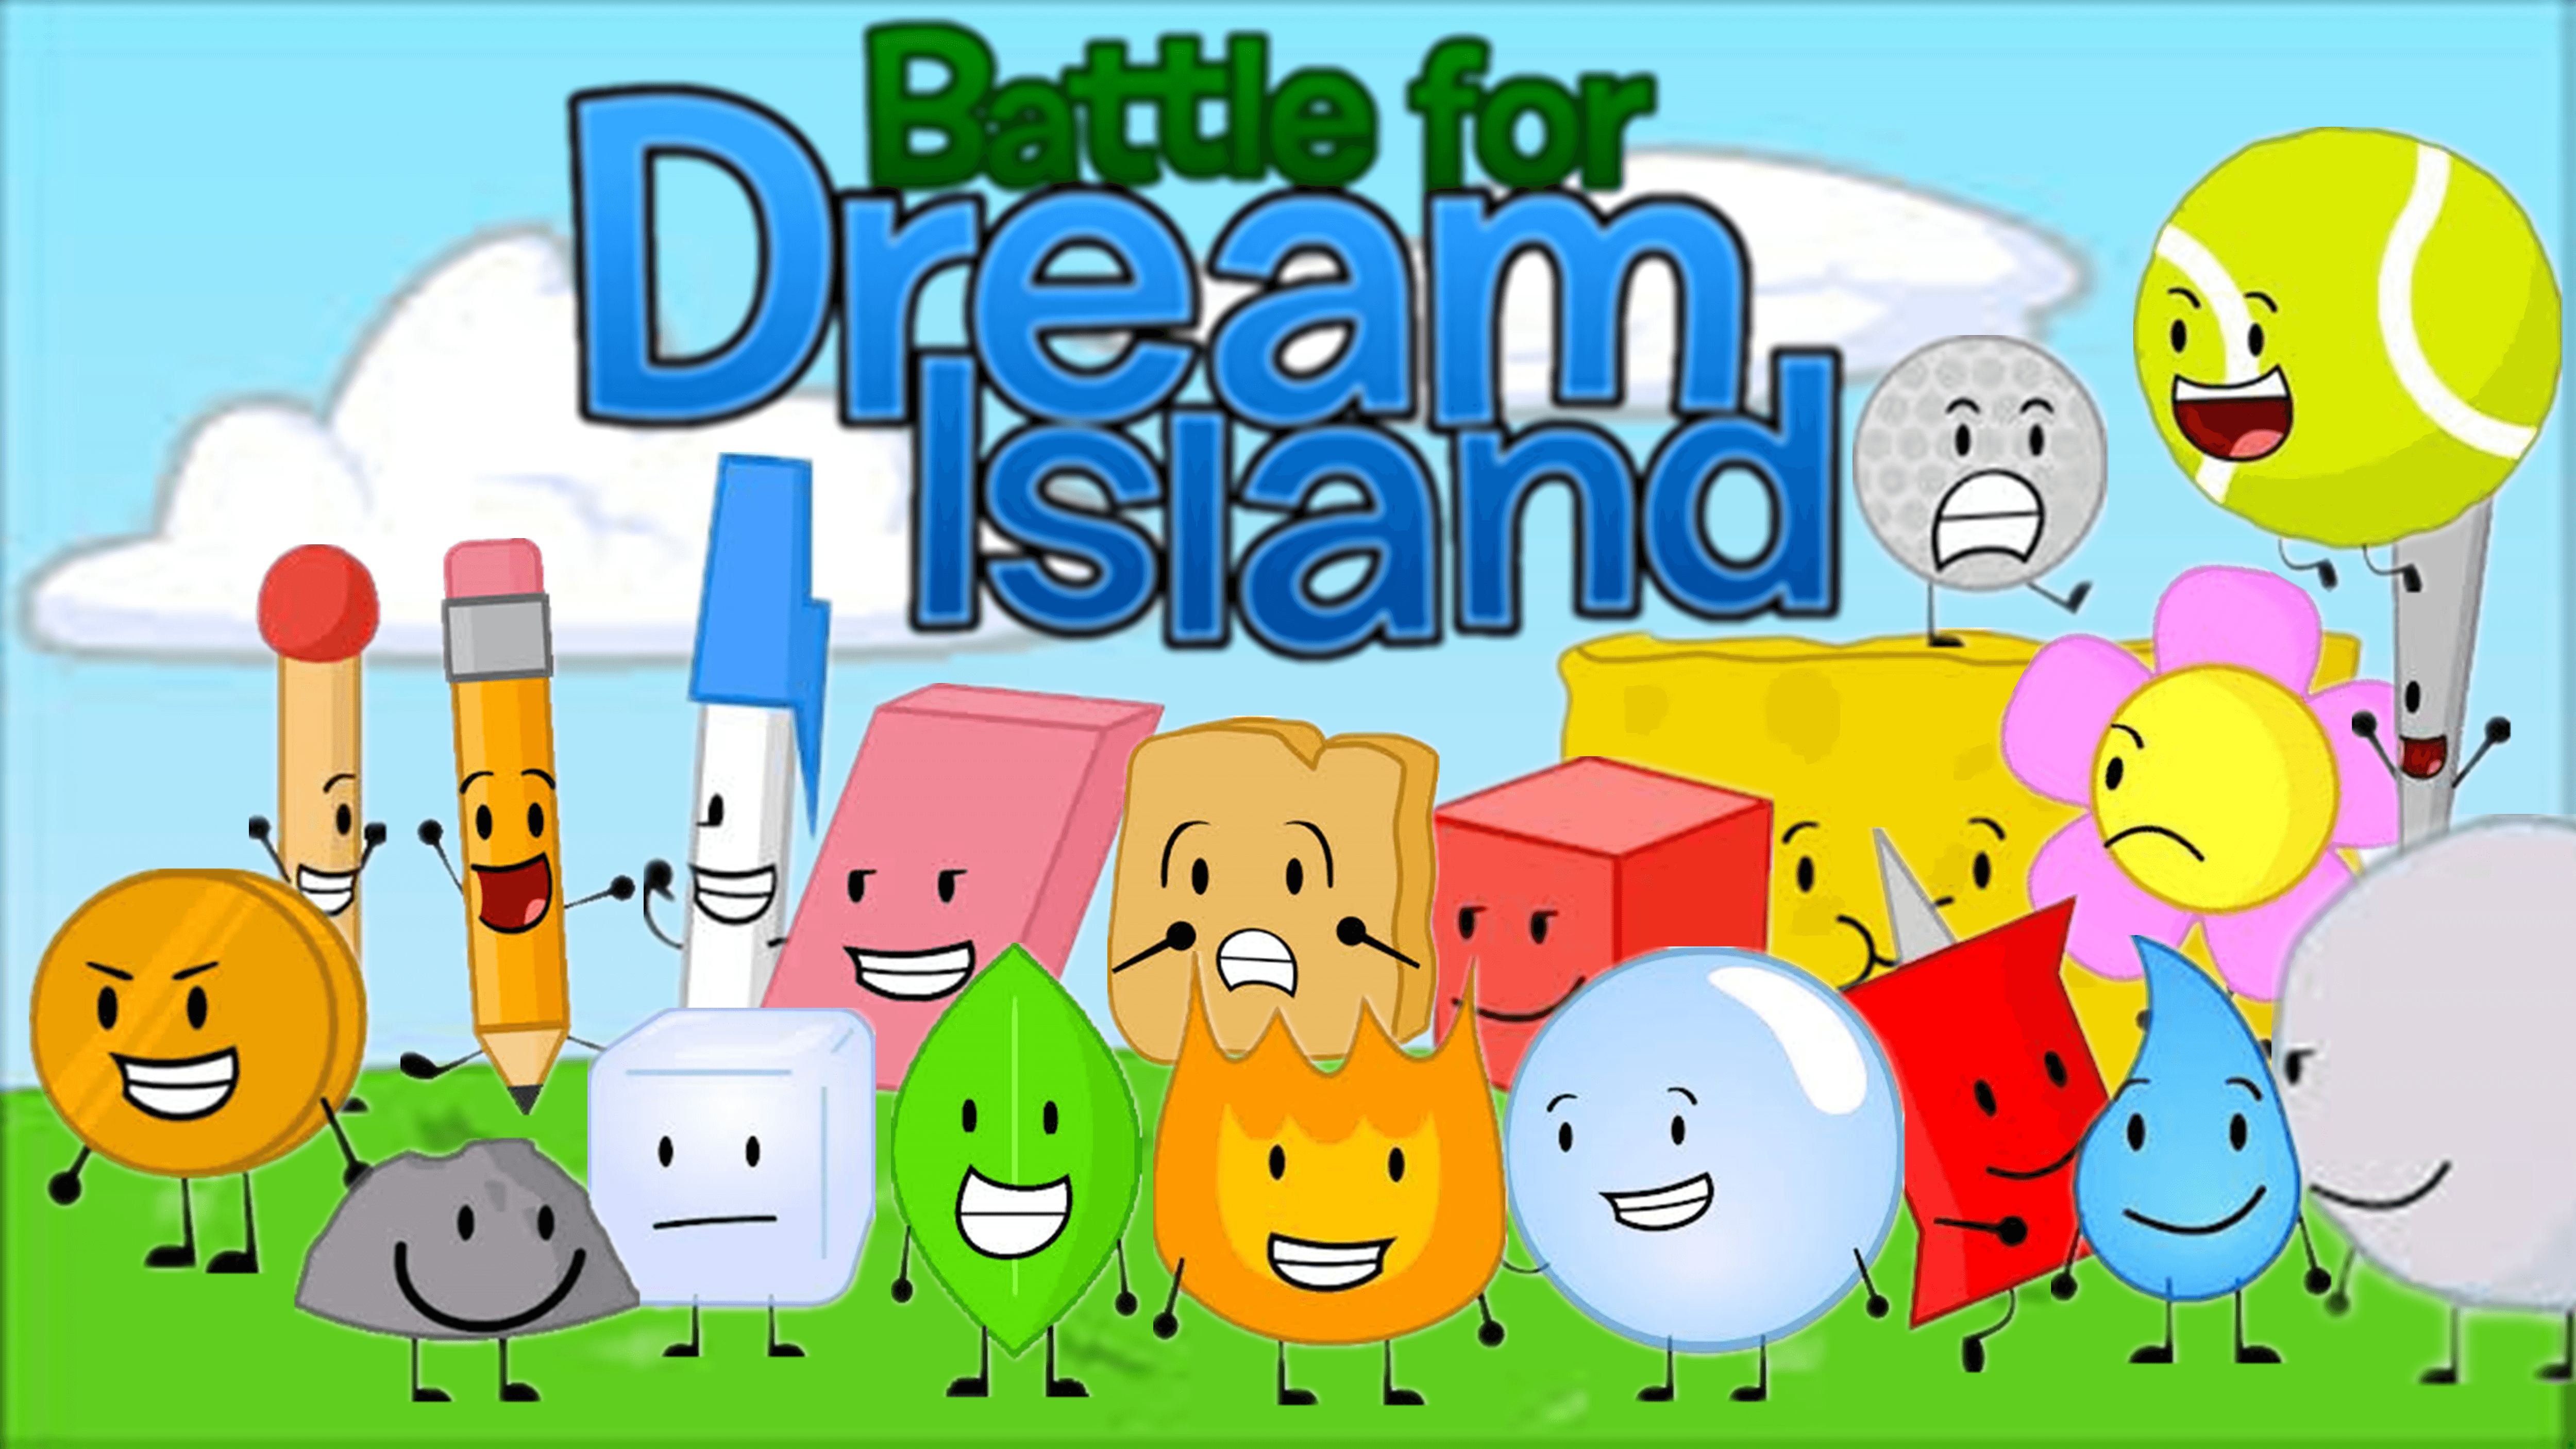 Battle for Dream Island New Cover by Phoenix.